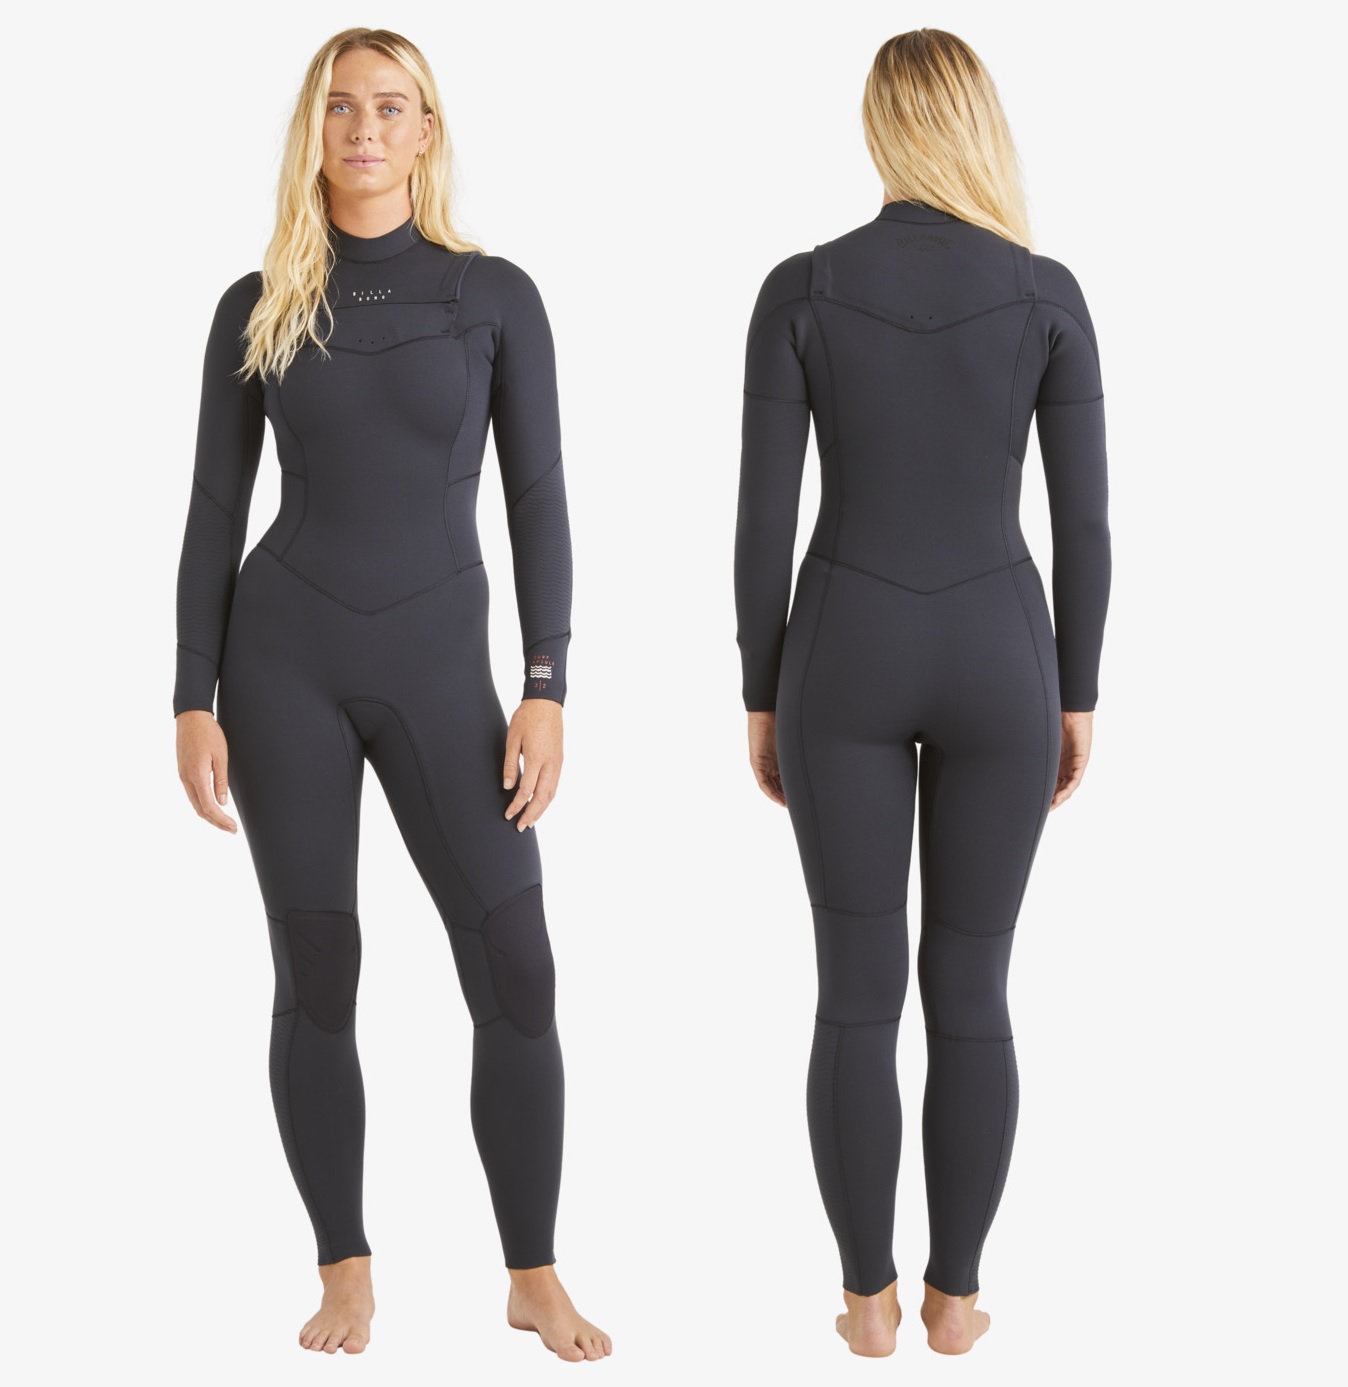 How to Put on a Chest zip wetsuit 